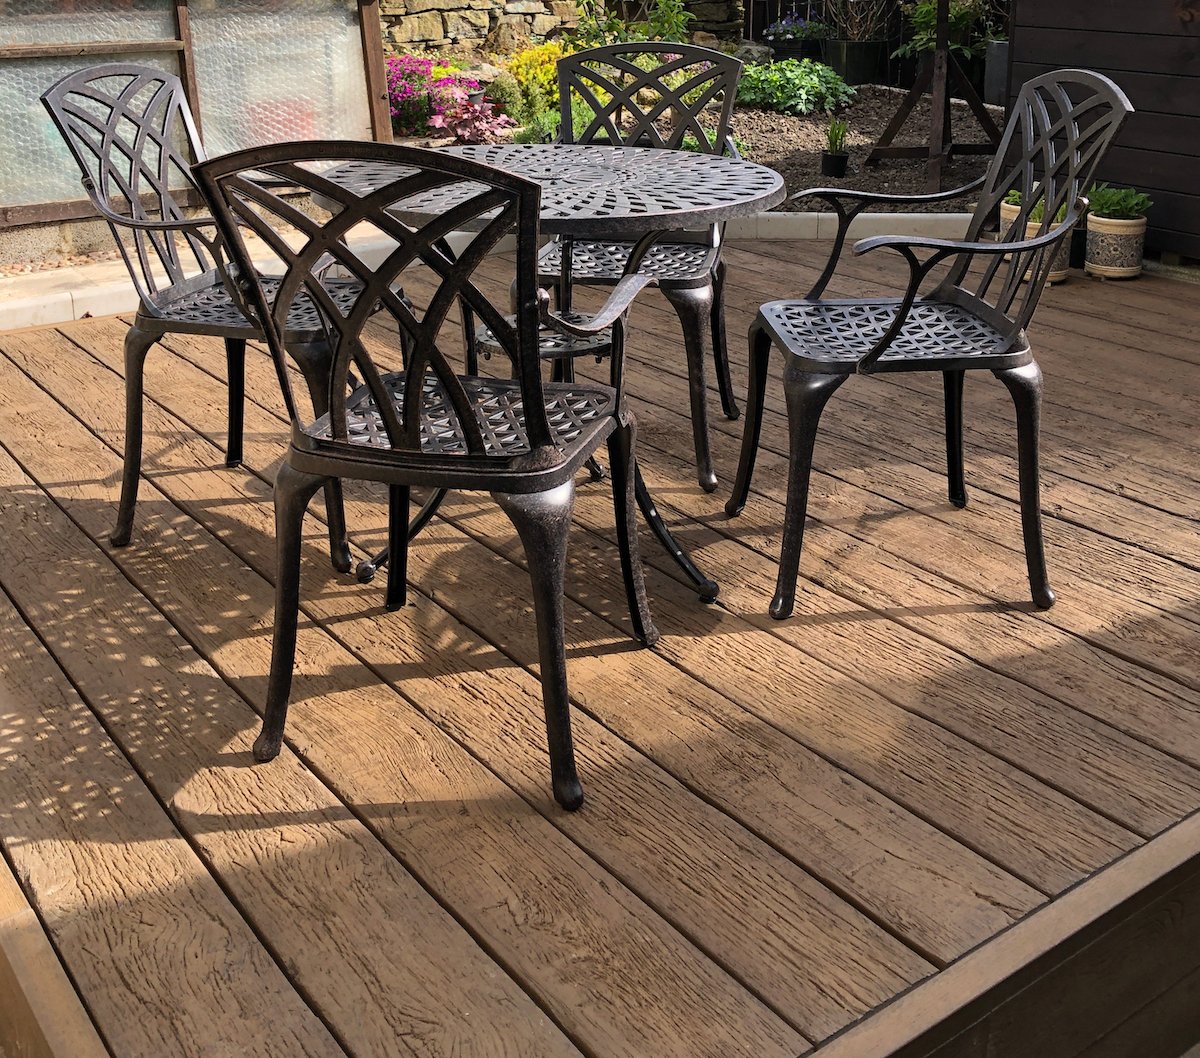 How to prevent scratches on your decking from garden furniture